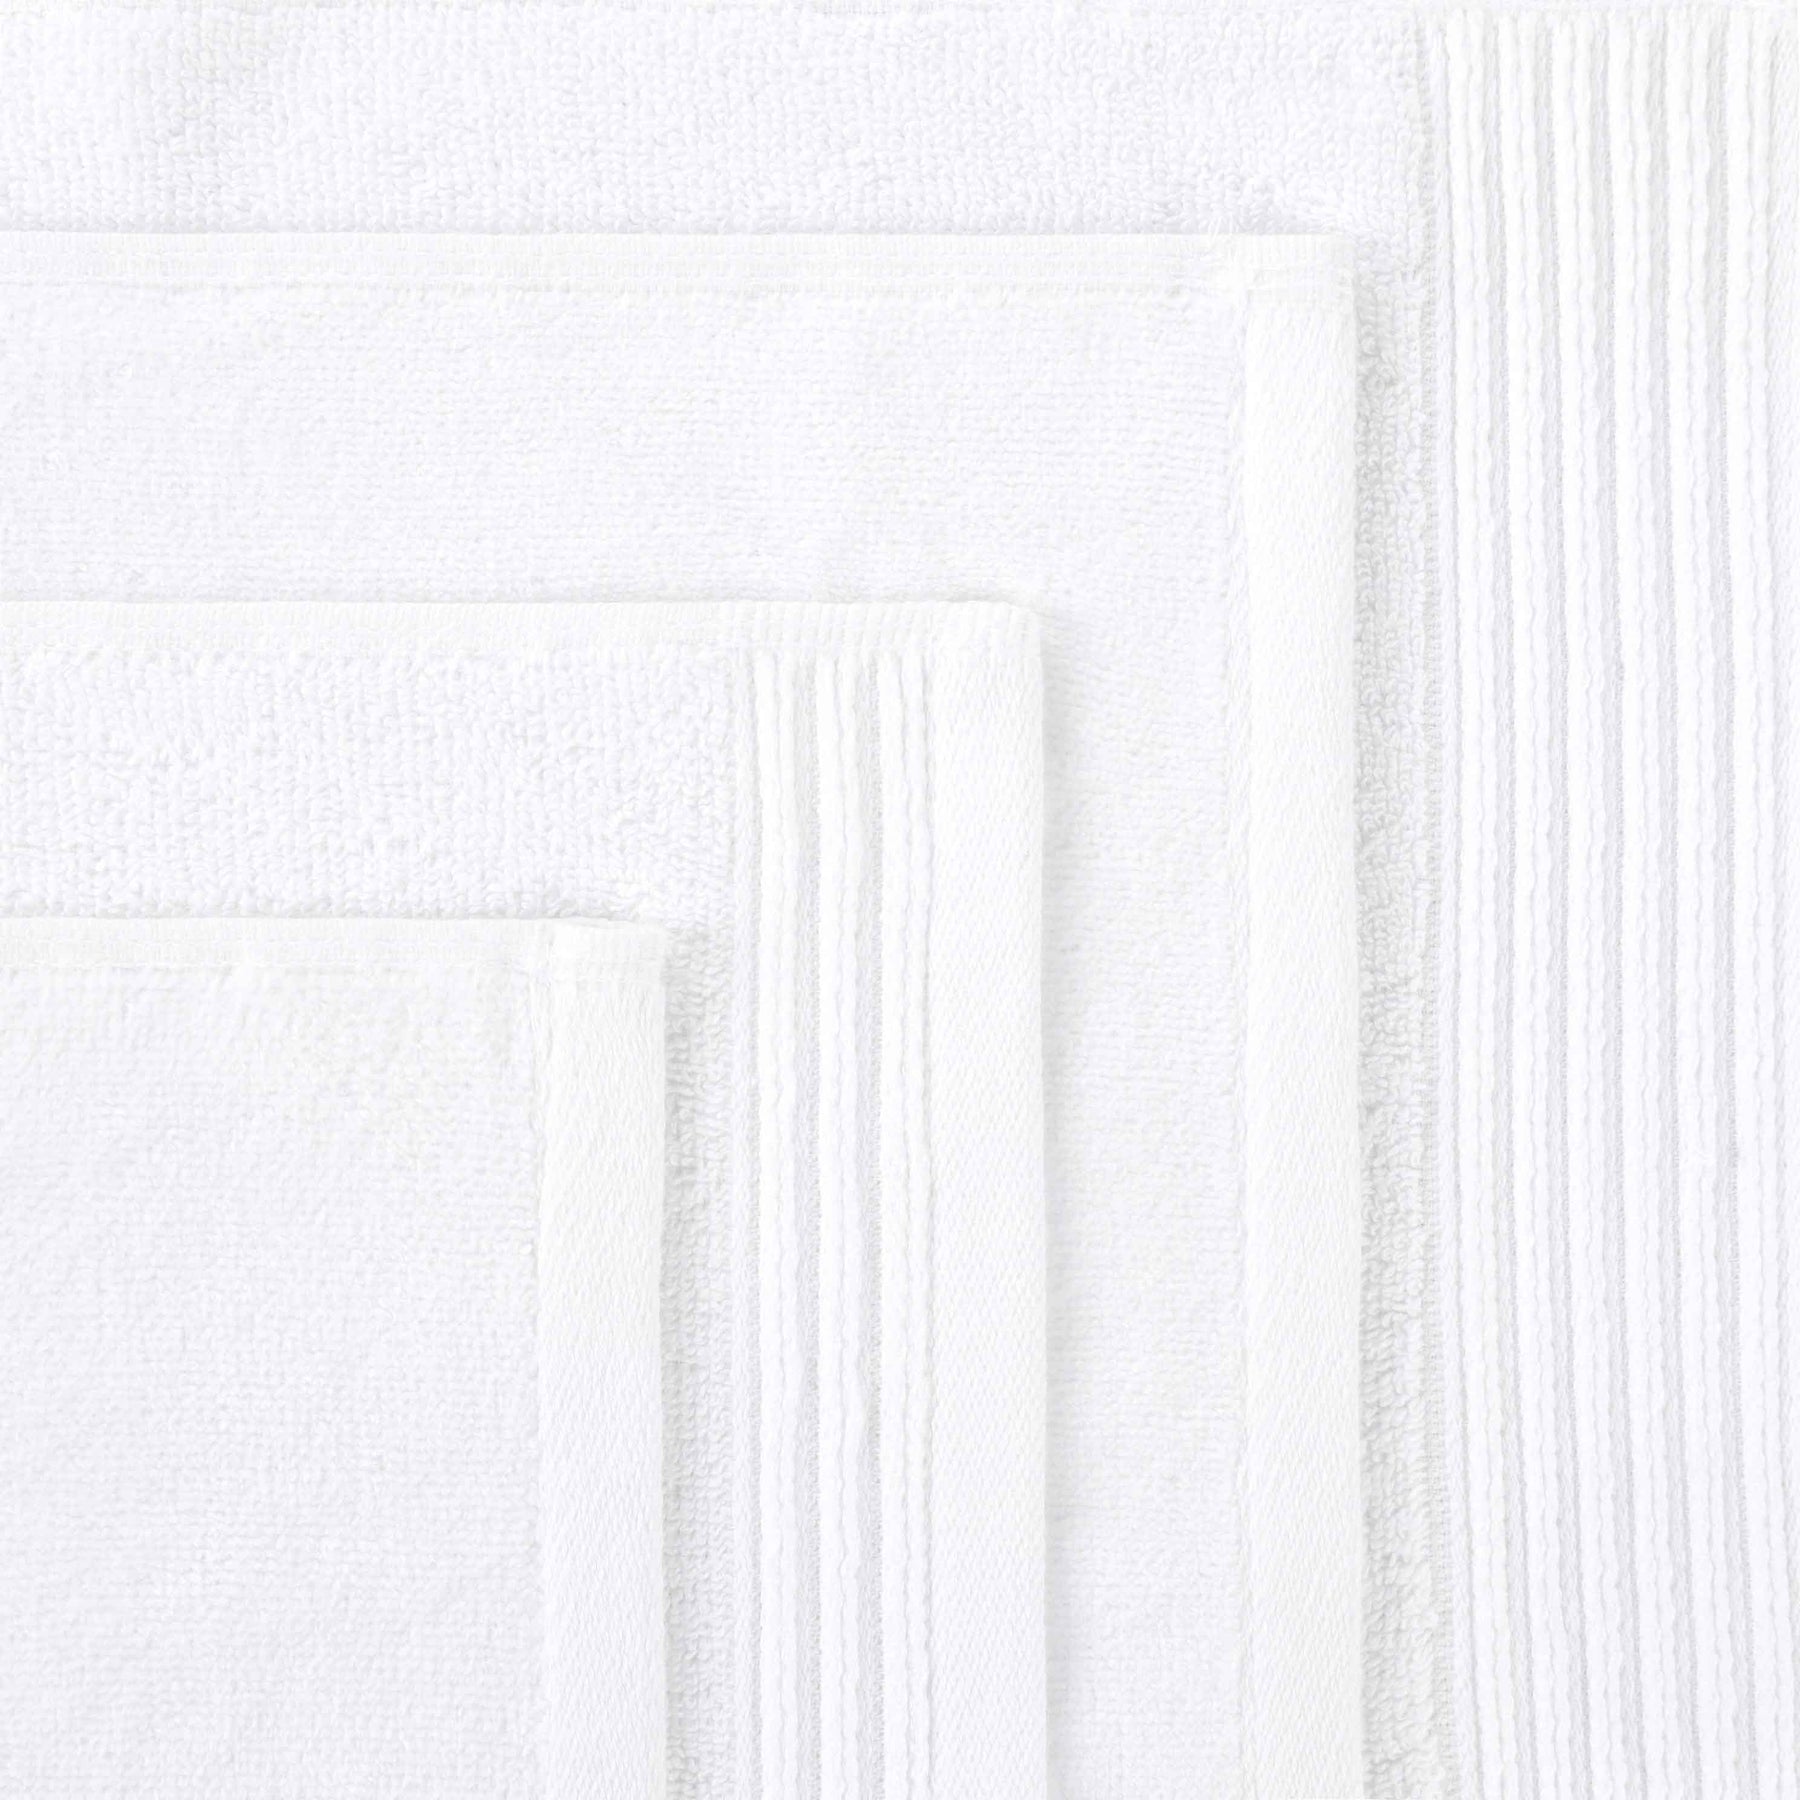 Cotton Marble and Solid Quick Dry 10 Piece Assorted Bathroom Towel Set - White